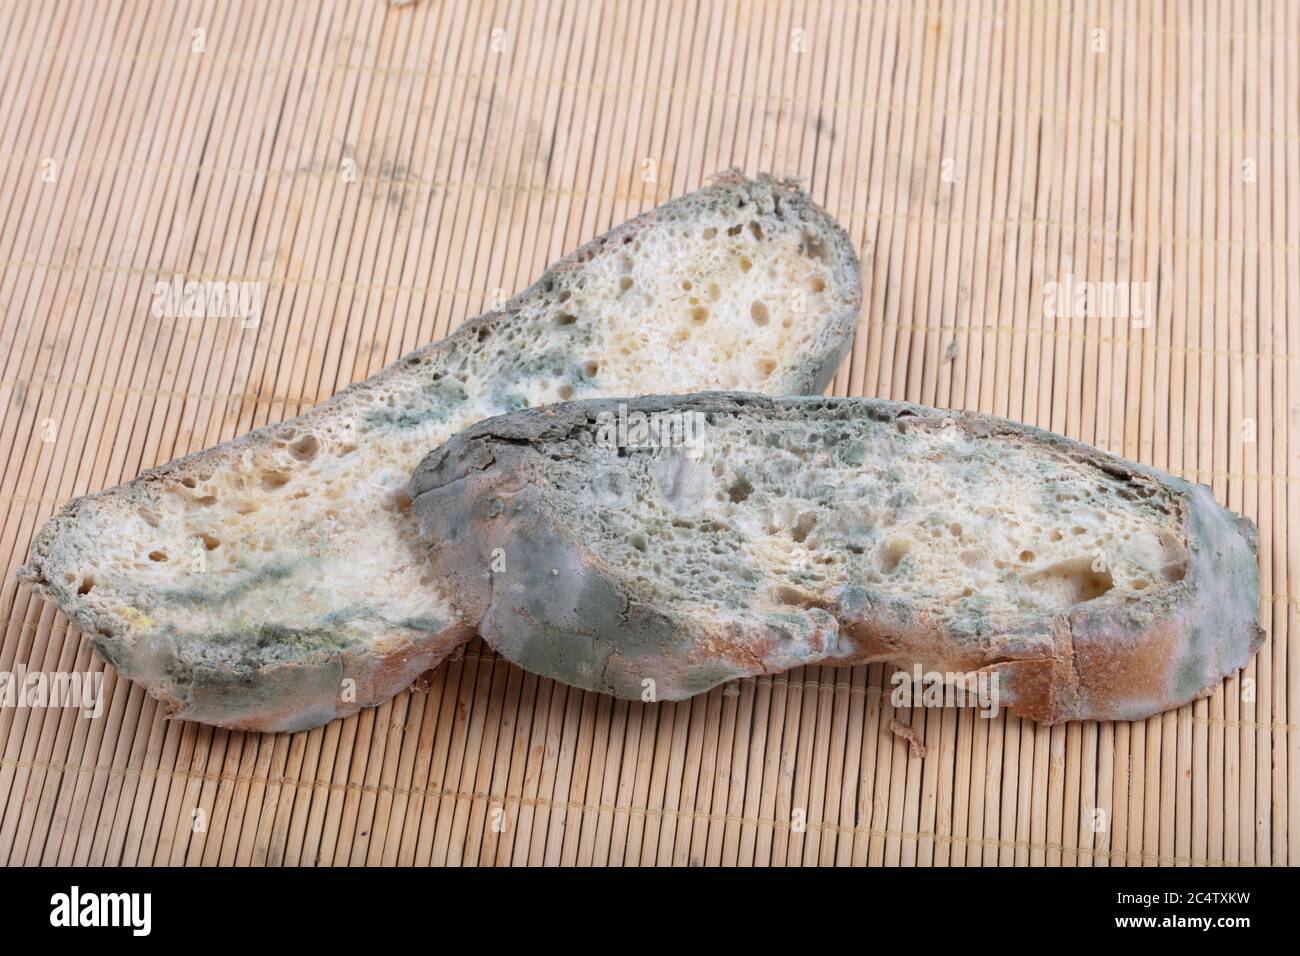 Macrophotography of green mildew on a stale bread. Surface of moldy bread. Spoiled bread with mold. Moldy fungus on rotten bread. Top view. Stock Photo